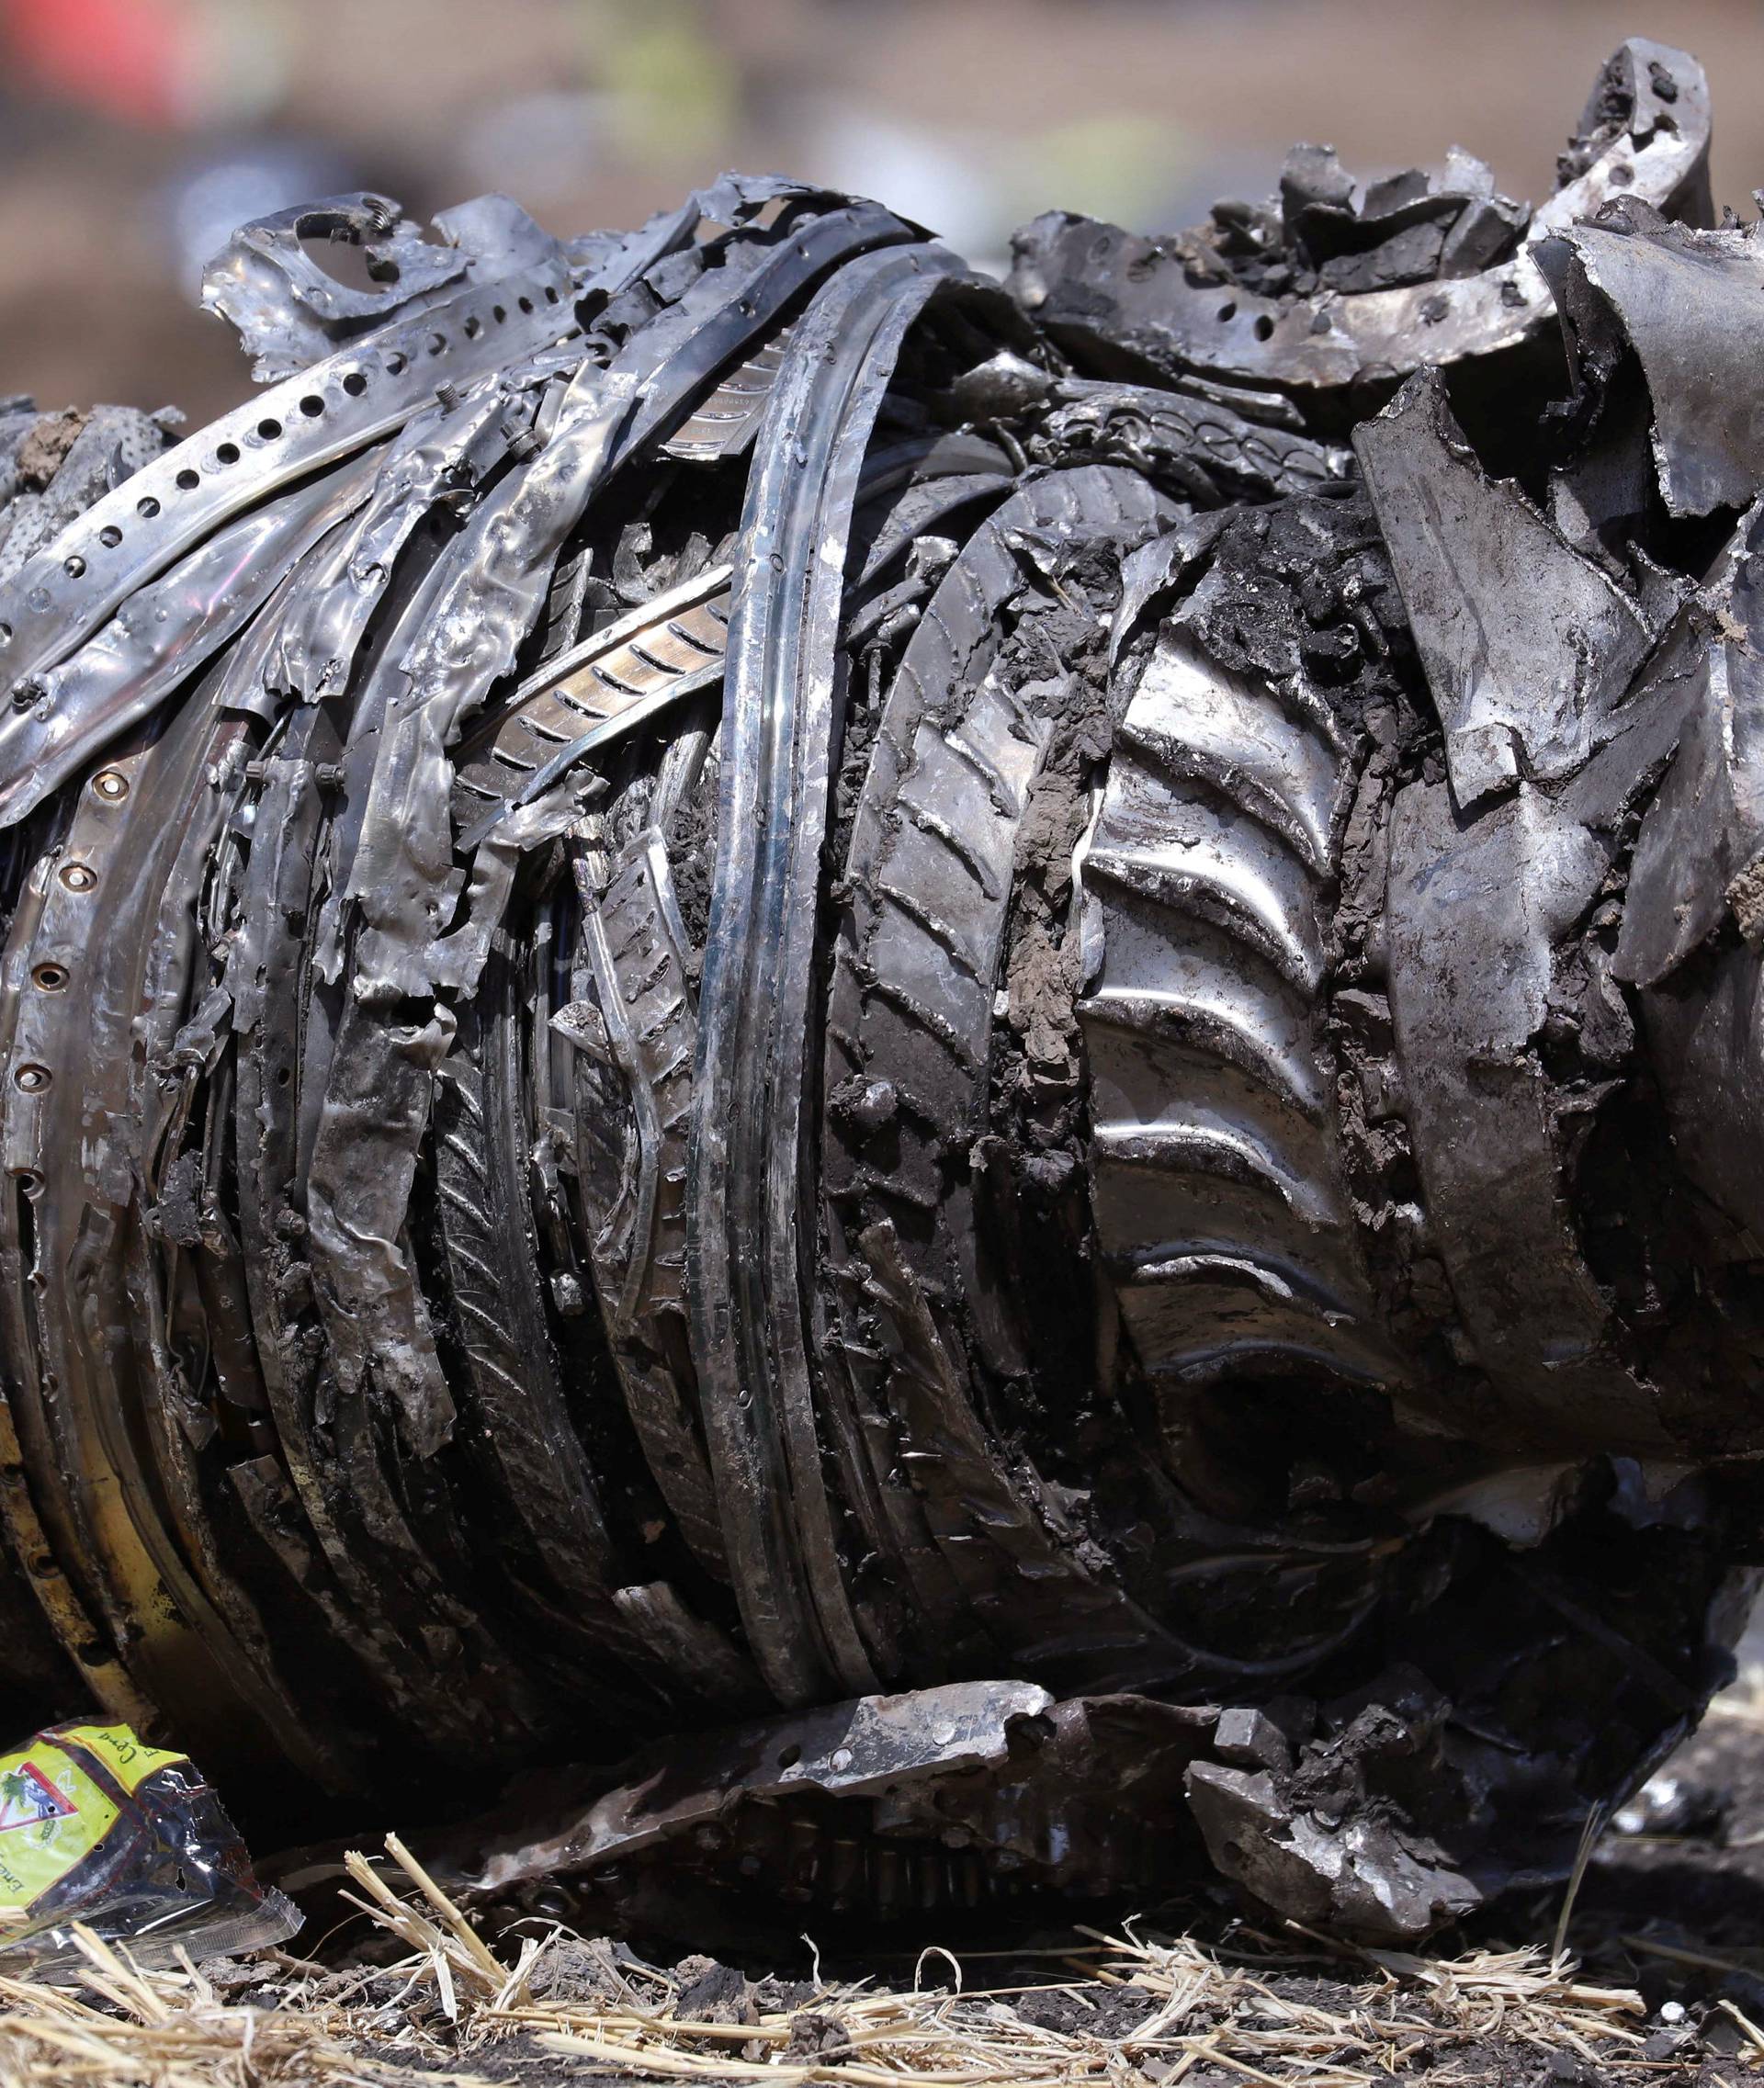 Airplane engine parts are seen at the scene of the Ethiopian Airlines Flight ET 302 plane crash, near the town of Bishoftu